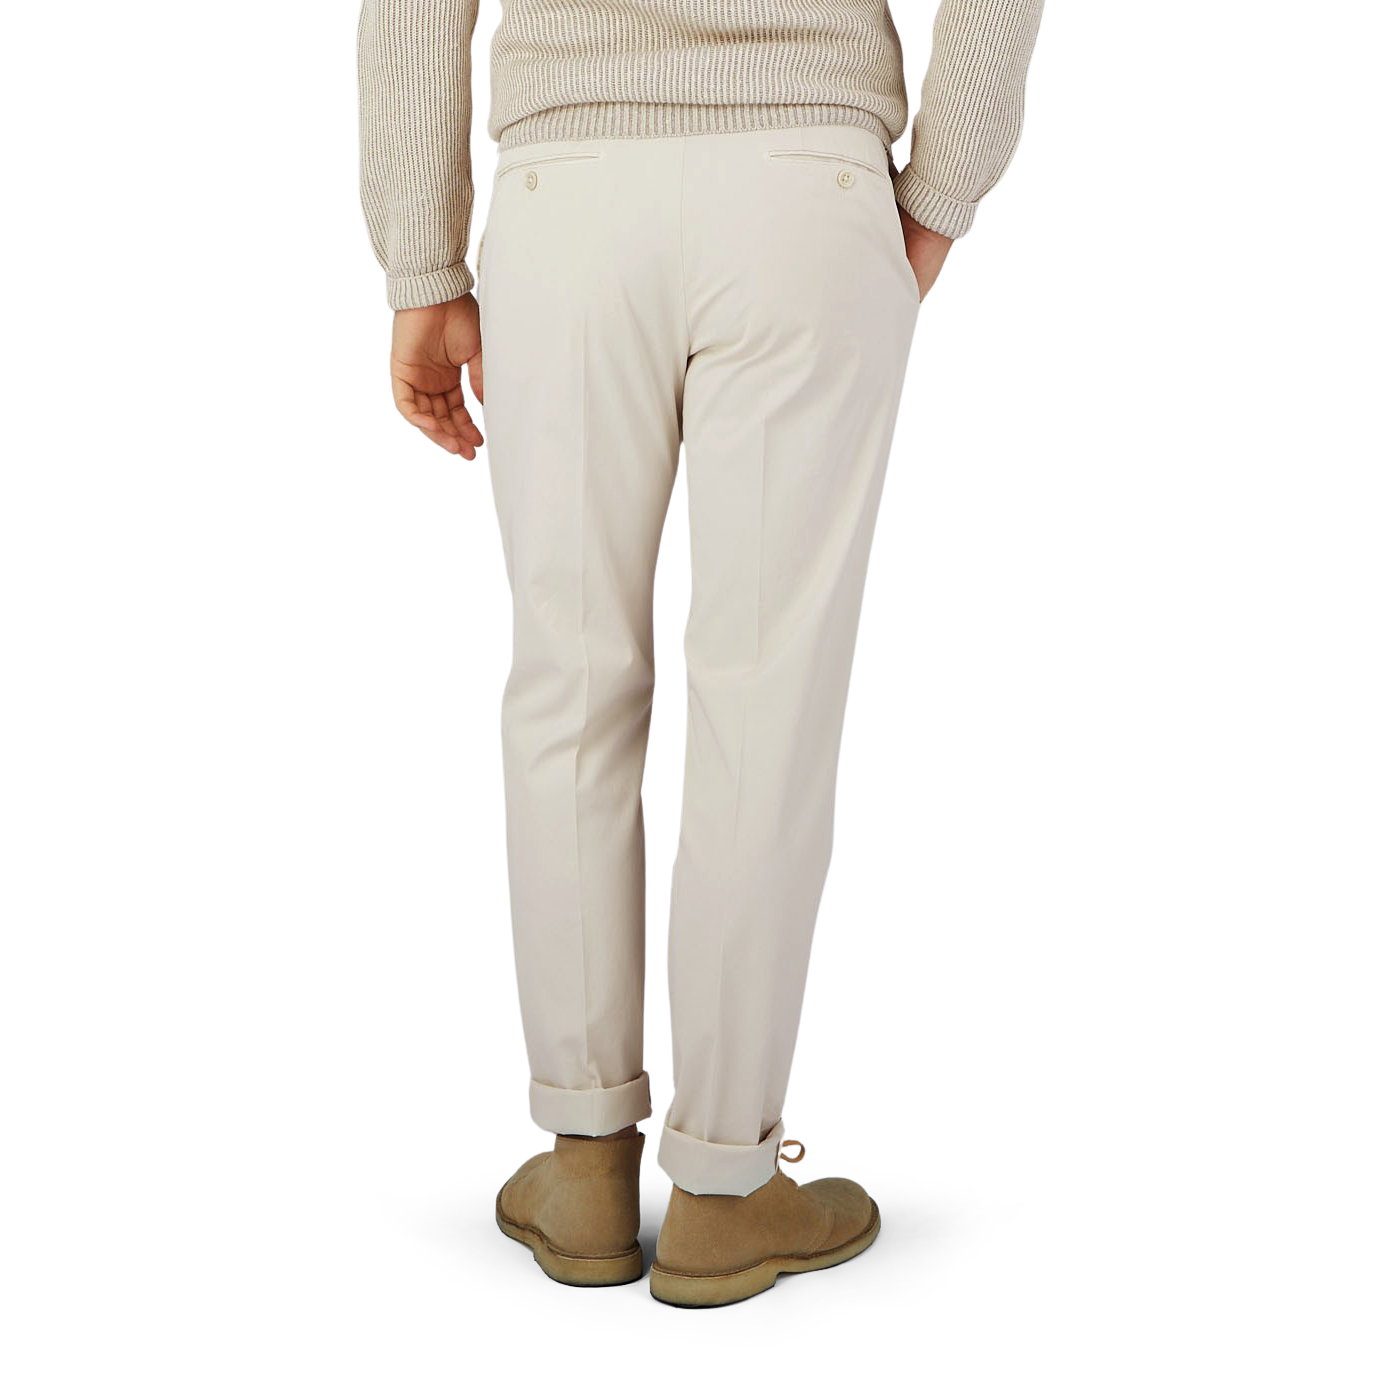 The man is wearing Light Beige Cotton Stretch Regular Chinos by Incotex, creating a stylish look from the back.